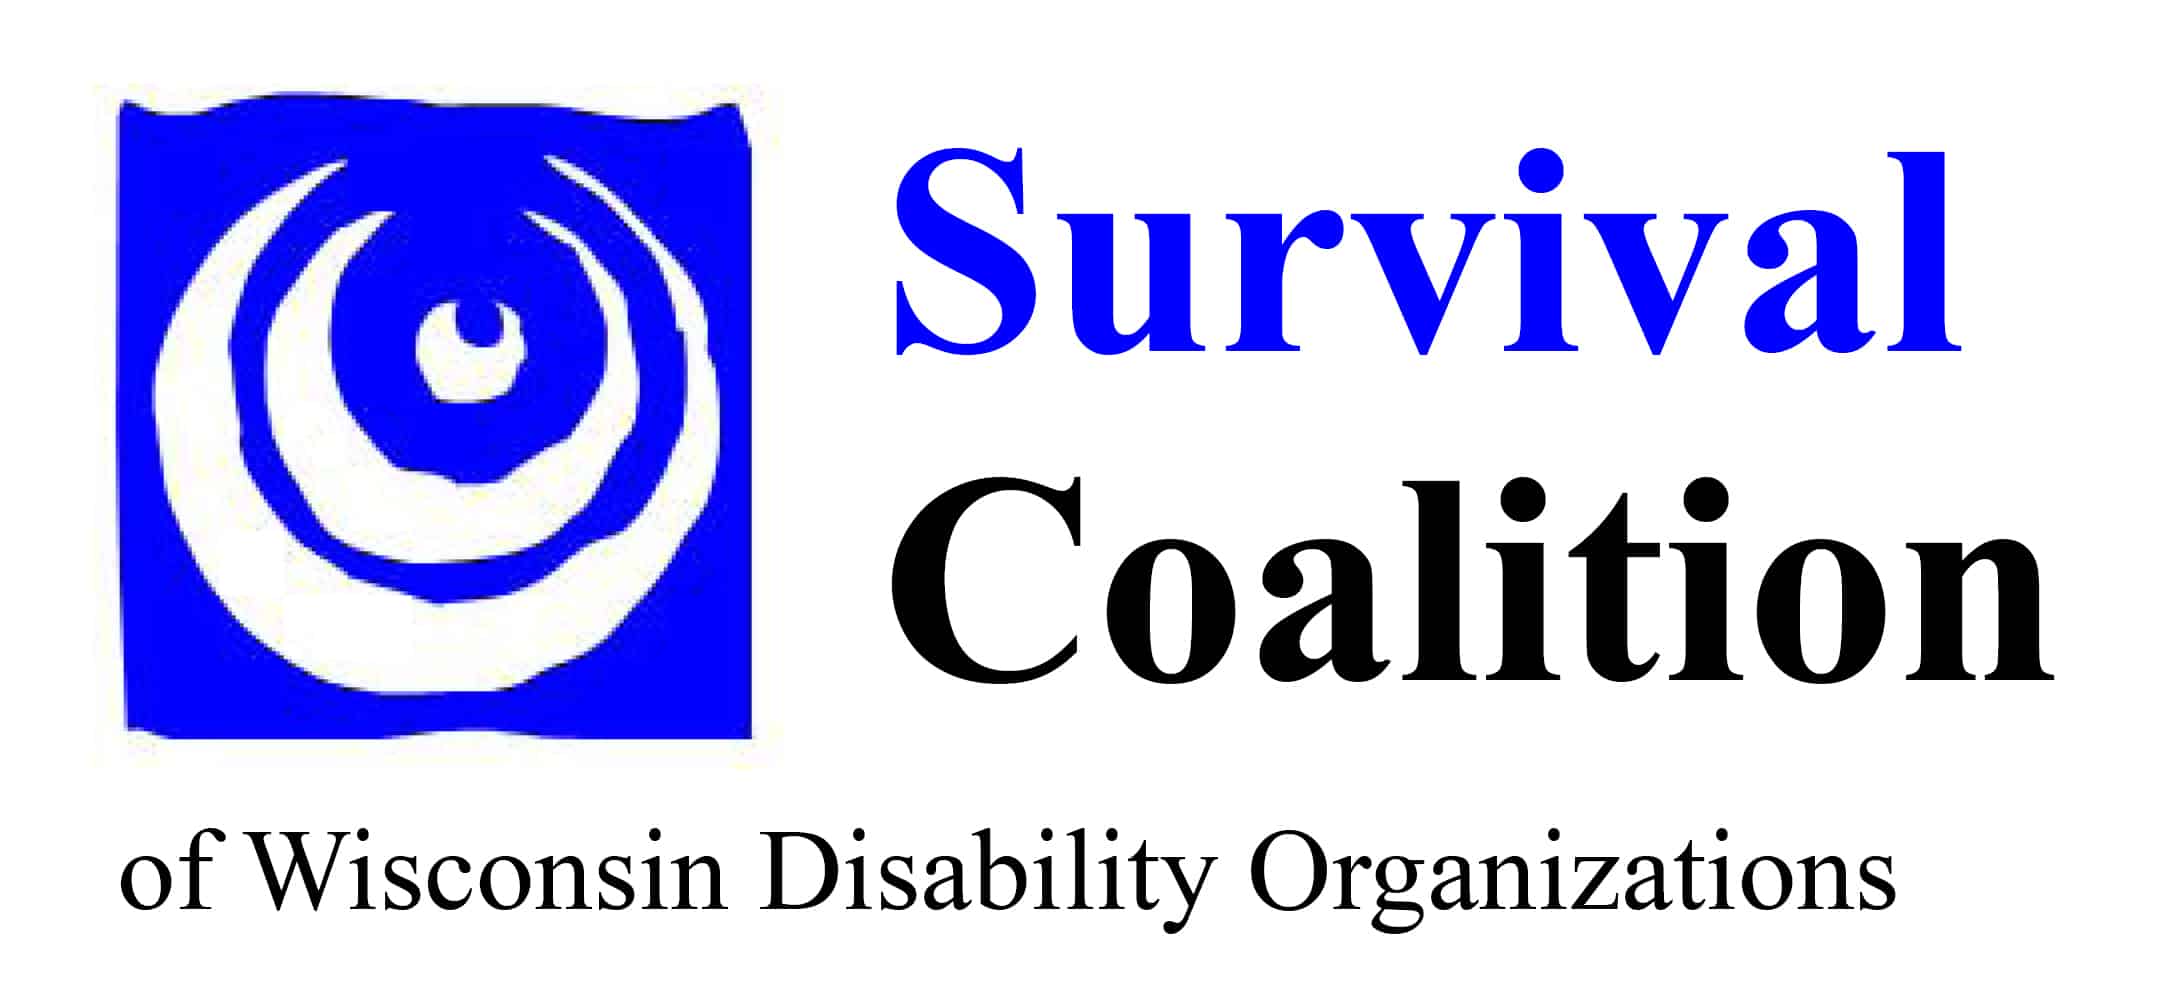 Survival Coalition of Wisconsin Disability Organizations Logo